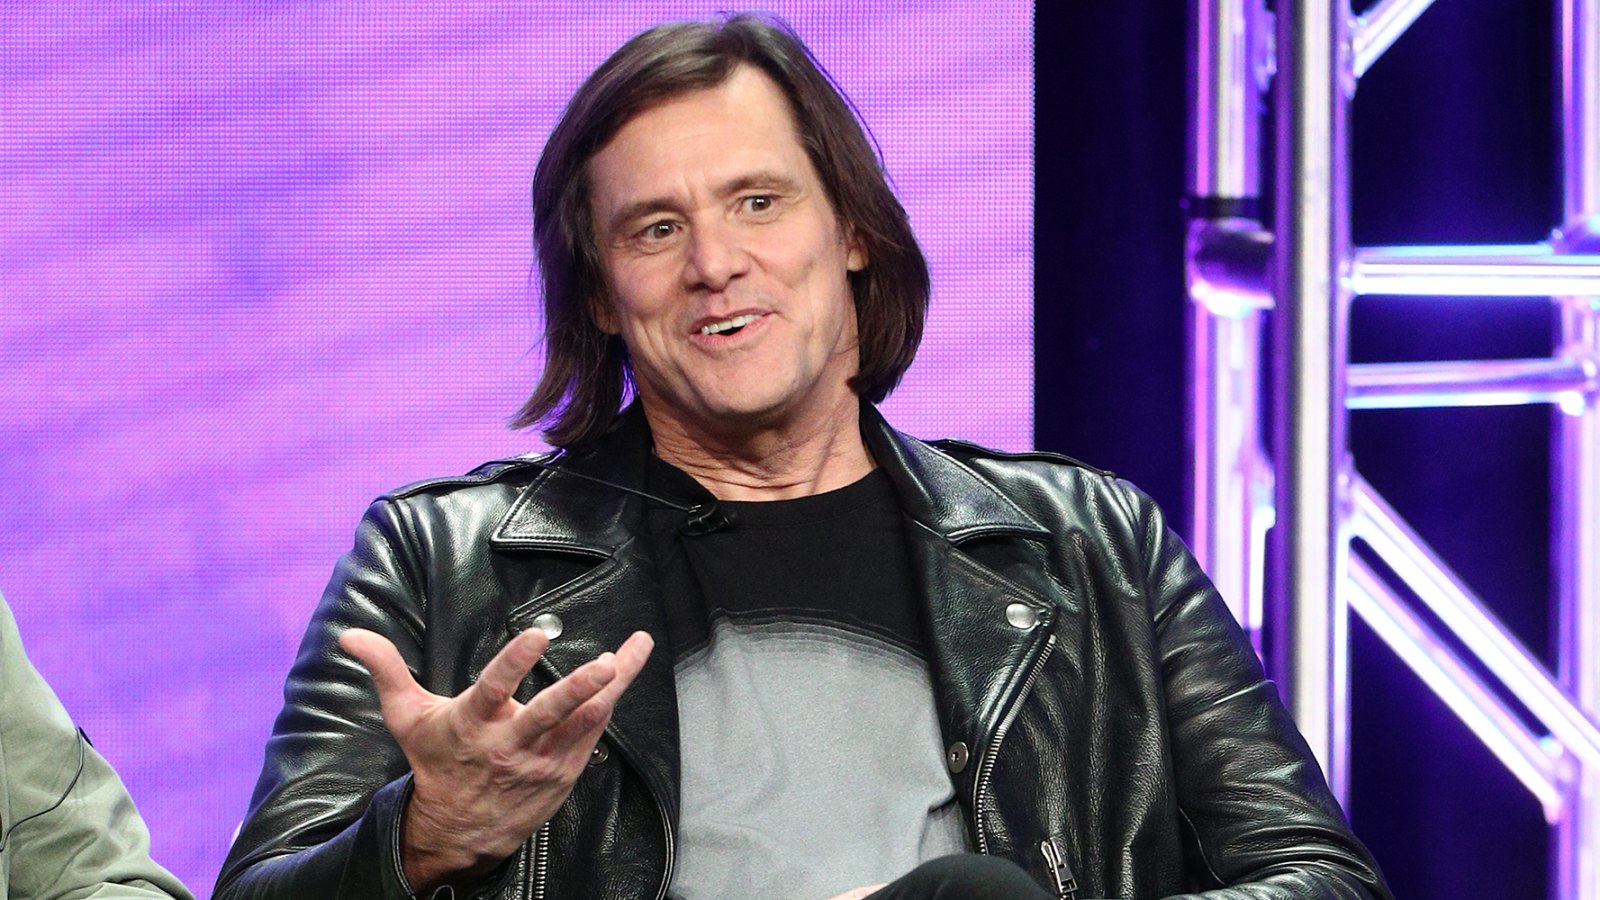 Jim Carrey Says His Plan ‘Was to Destroy’ Hollywood